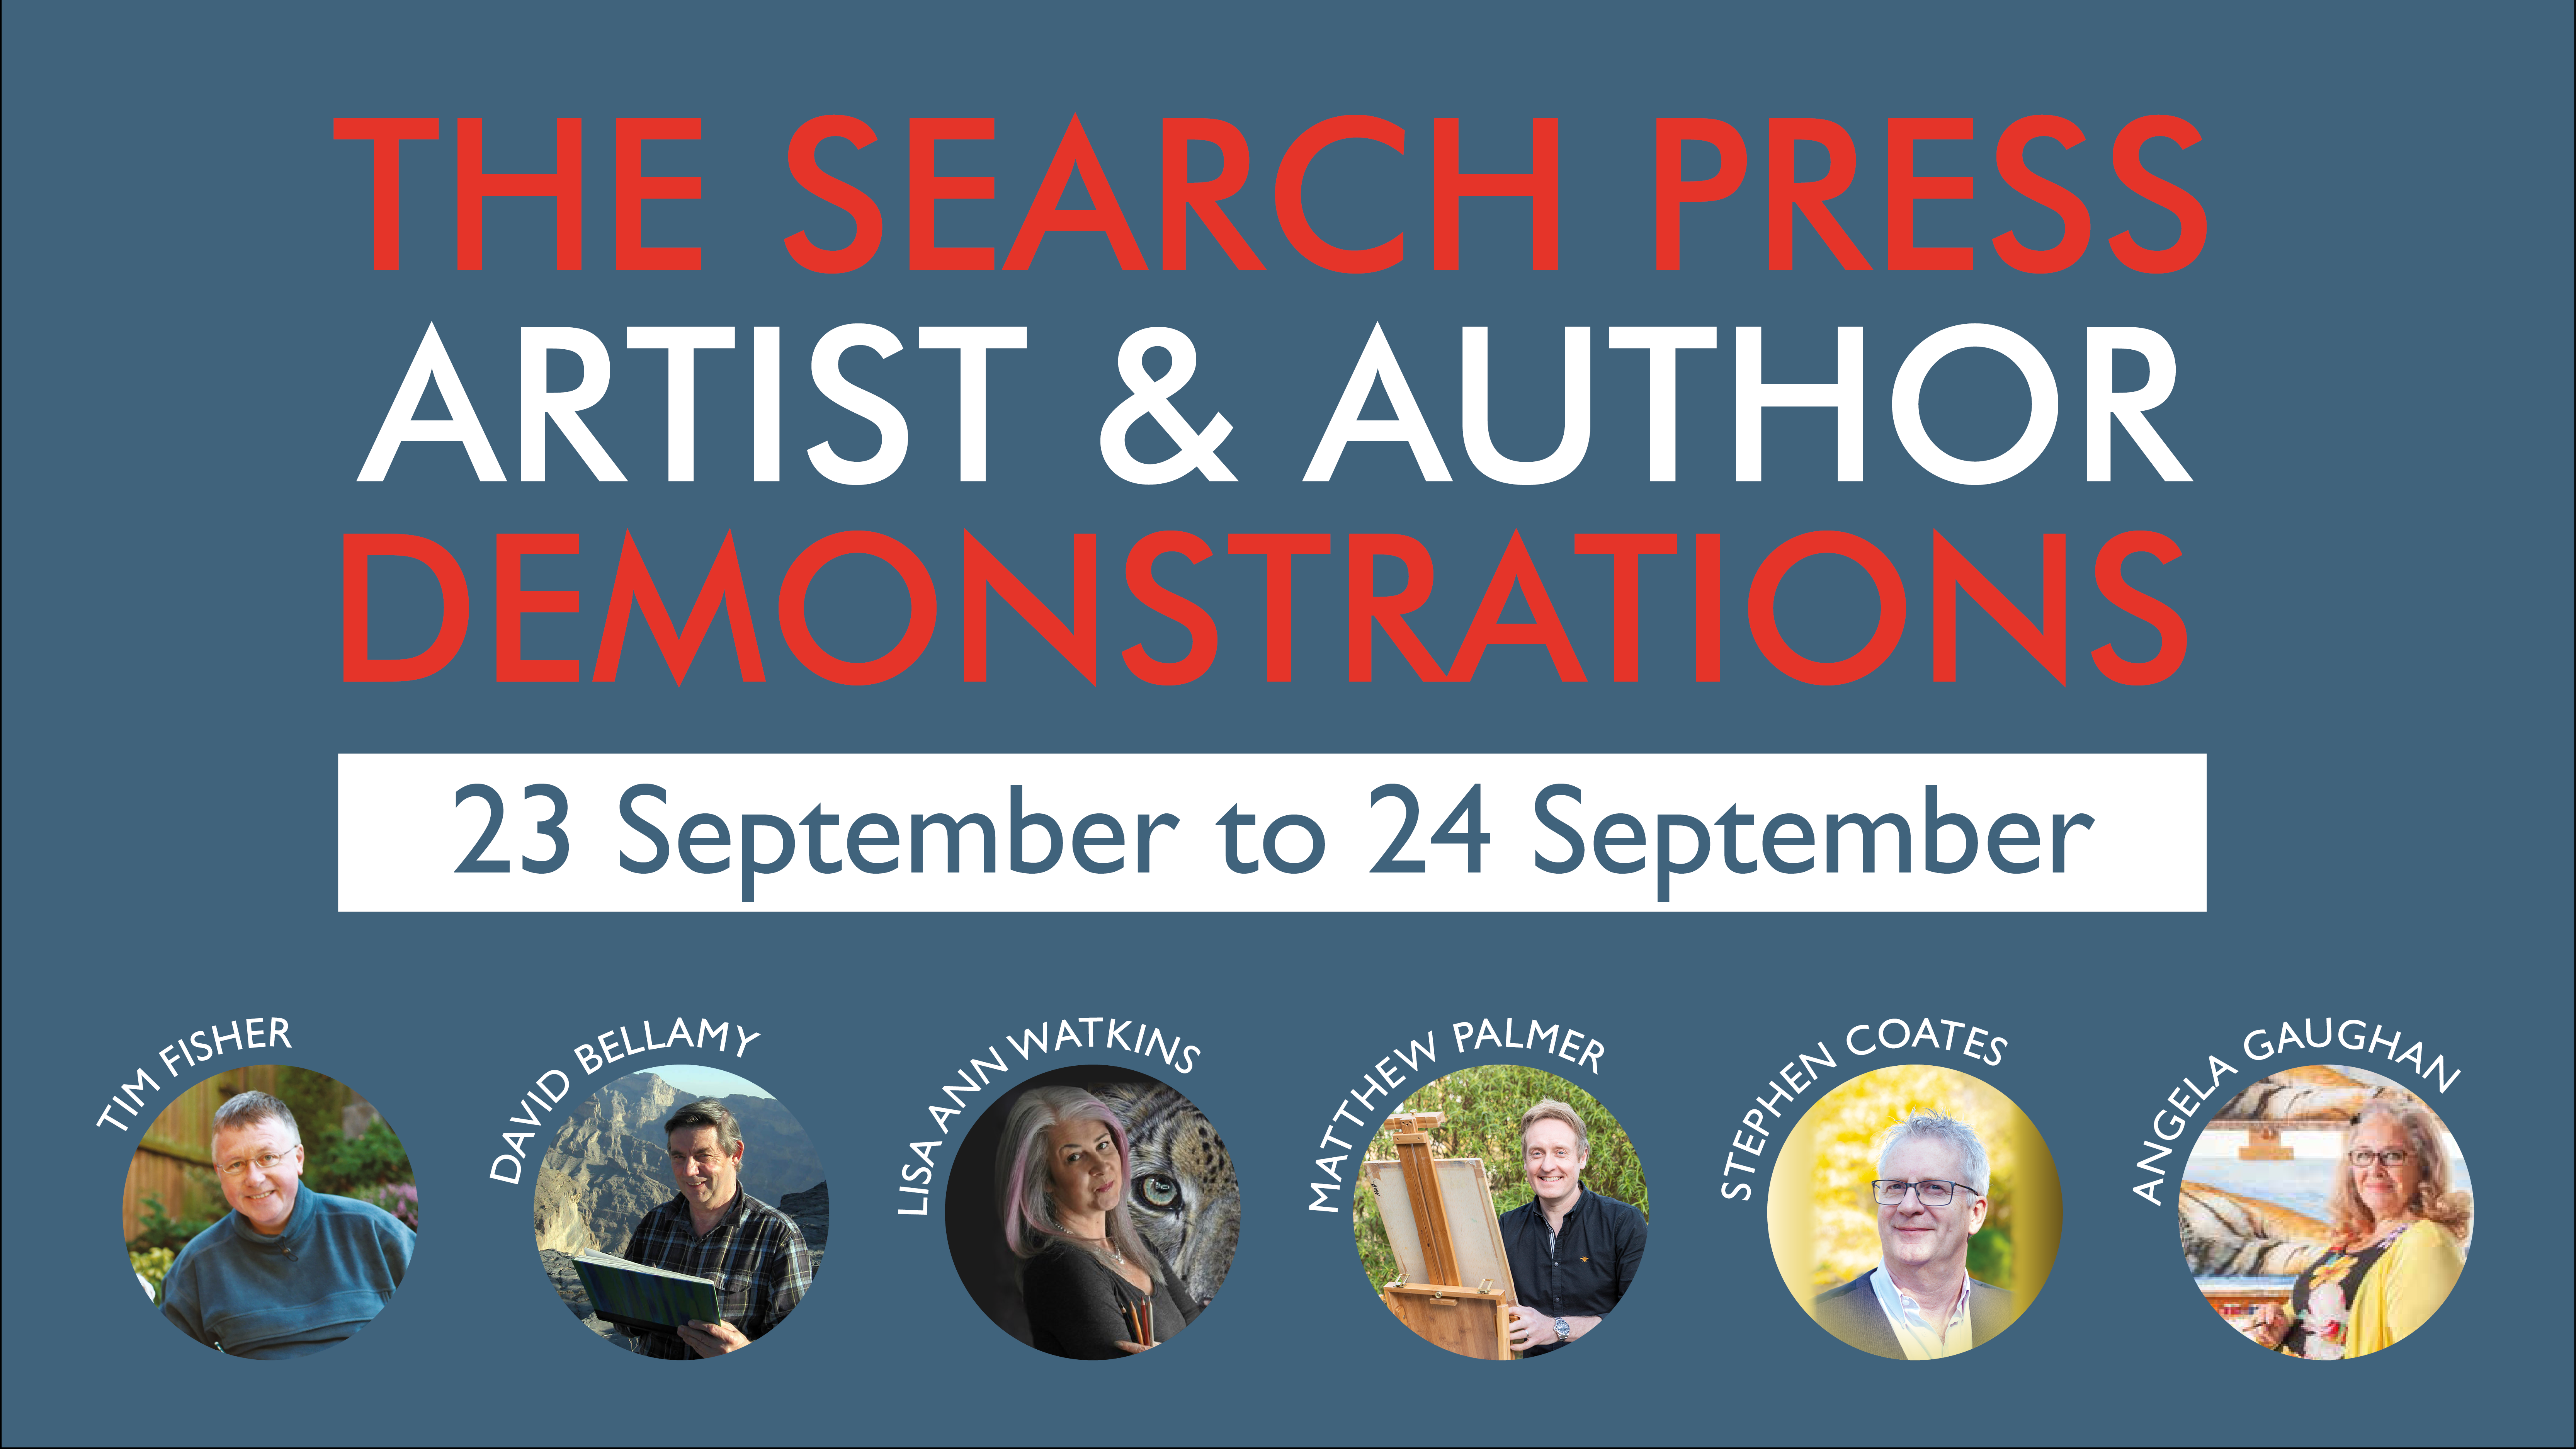 The Search Press Artist & Author Demonstrations